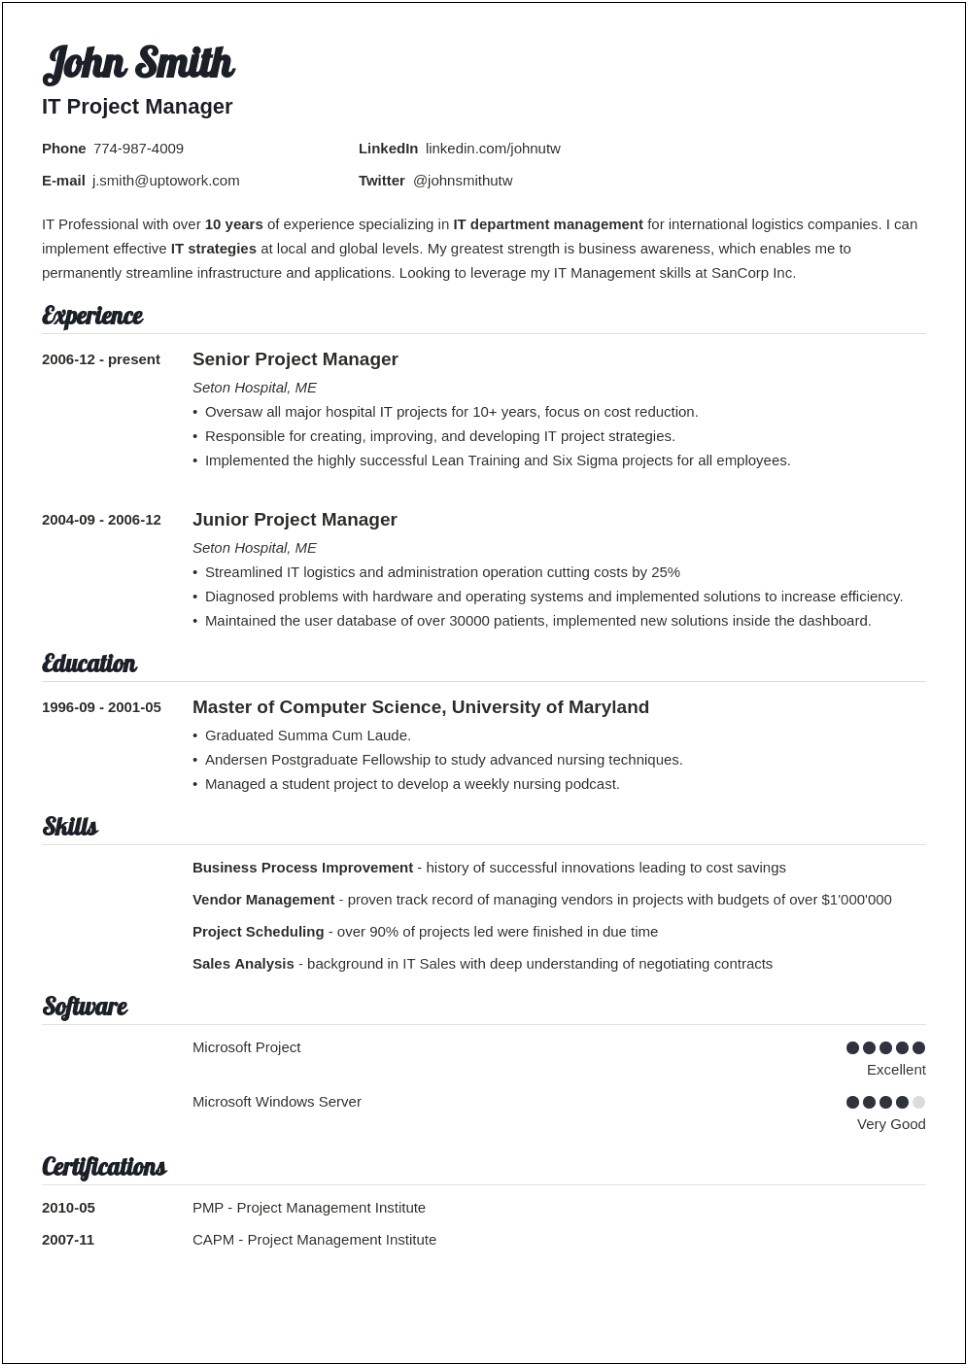 Example Of Resume With Bullet Points